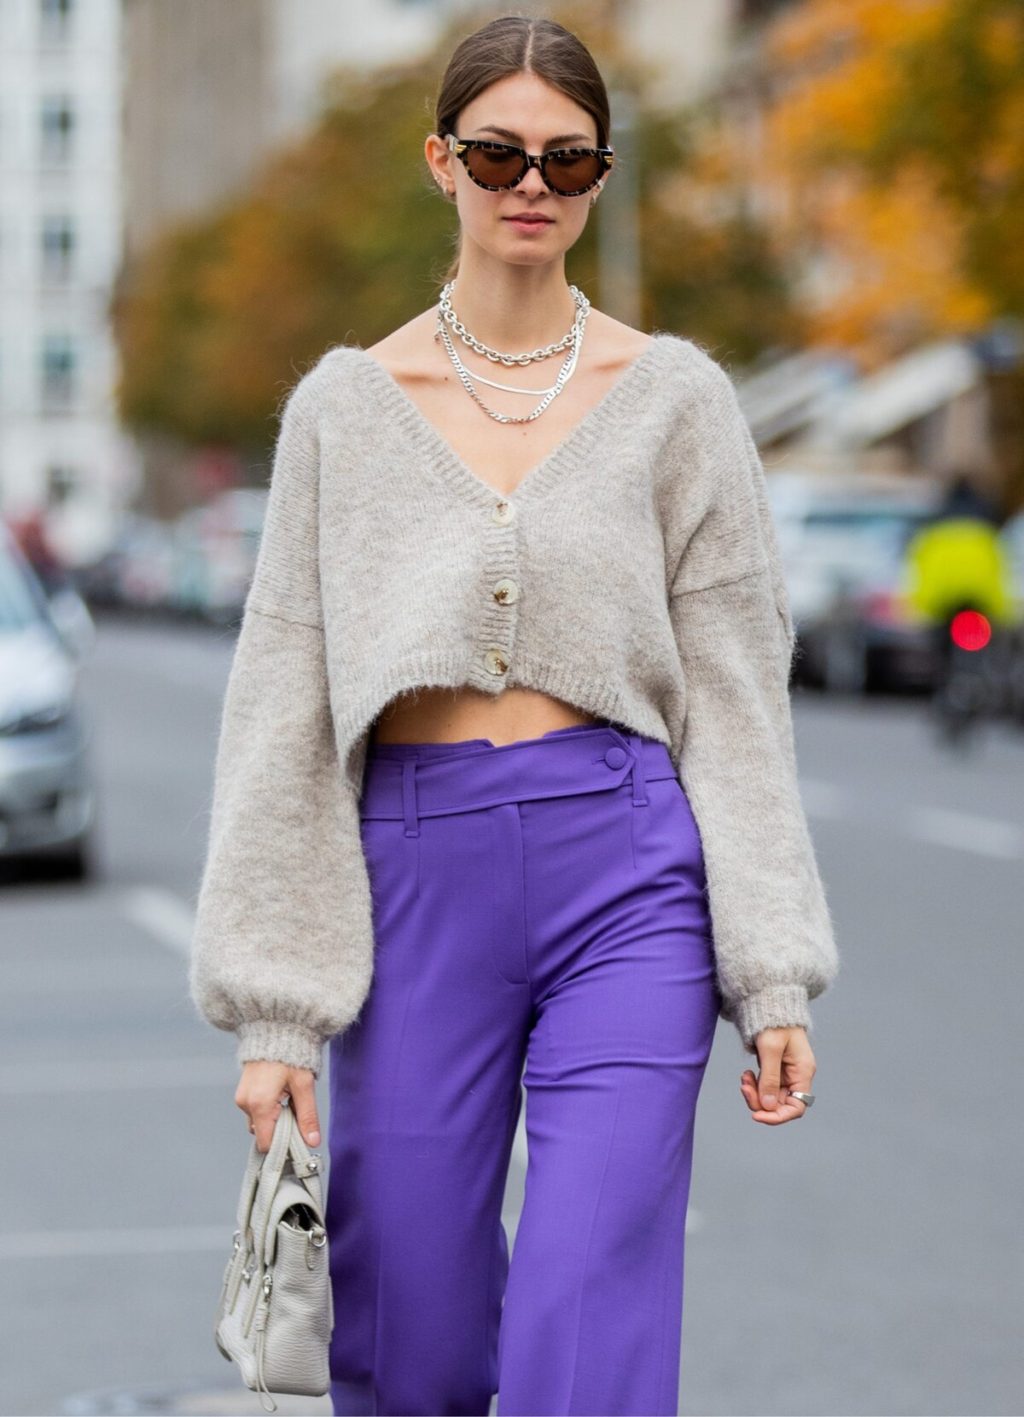 Cropped Cardigans 60+ Fashionable '90s Ladies Outfit Ideas That Come Back - 49